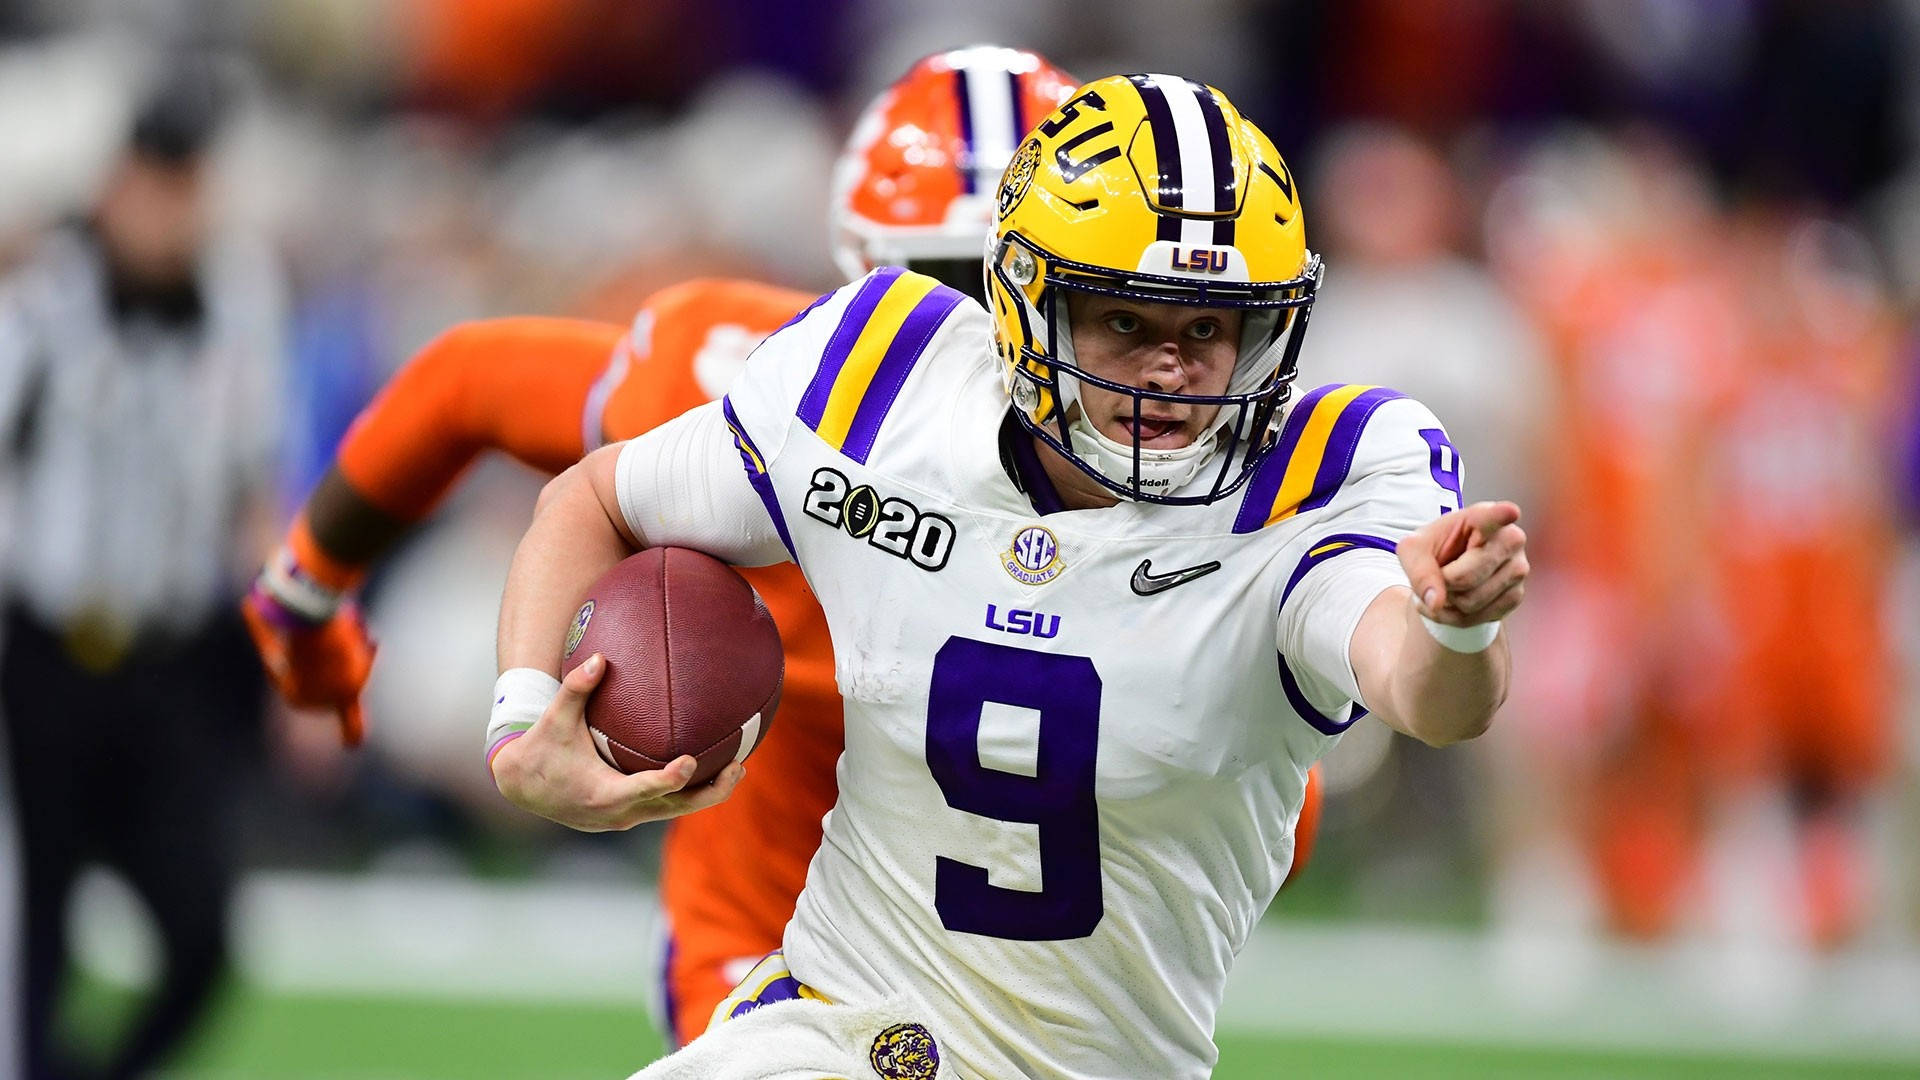 Joe Burrow Confidently Pointing During A Game